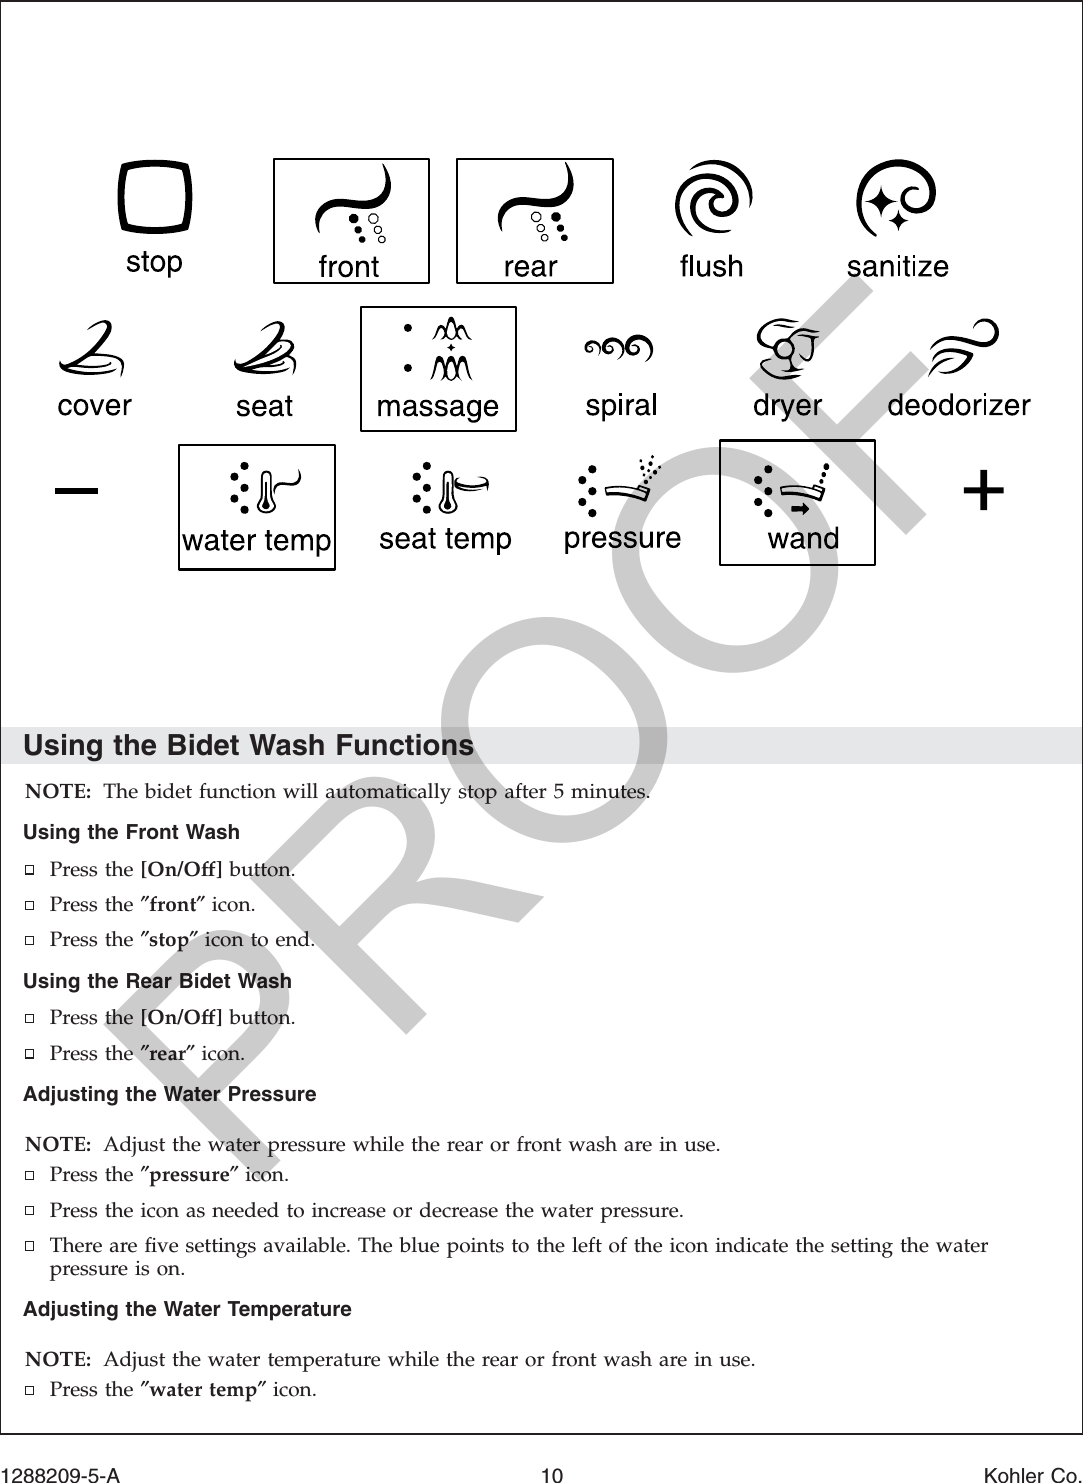 Using the Bidet Wash FunctionsNOTE: The bidet function will automatically stop after 5 minutes.Using the Front WashPress the [On/Off] button.Press the ″front″icon.Press the ″stop″icon to end.Using the Rear Bidet WashPress the [On/Off] button.Press the ″rear″icon.Adjusting the Water PressureNOTE: Adjust the water pressure while the rear or front wash are in use.Press the ″pressure″icon.Press the icon as needed to increase or decrease the water pressure.There are ﬁve settings available. The blue points to the left of the icon indicate the setting the waterpressure is on.Adjusting the Water TemperatureNOTE: Adjust the water temperature while the rear or front wash are in use.Press the ″water temp″icon.1288209-5-A 10 Kohler Co.PROOF